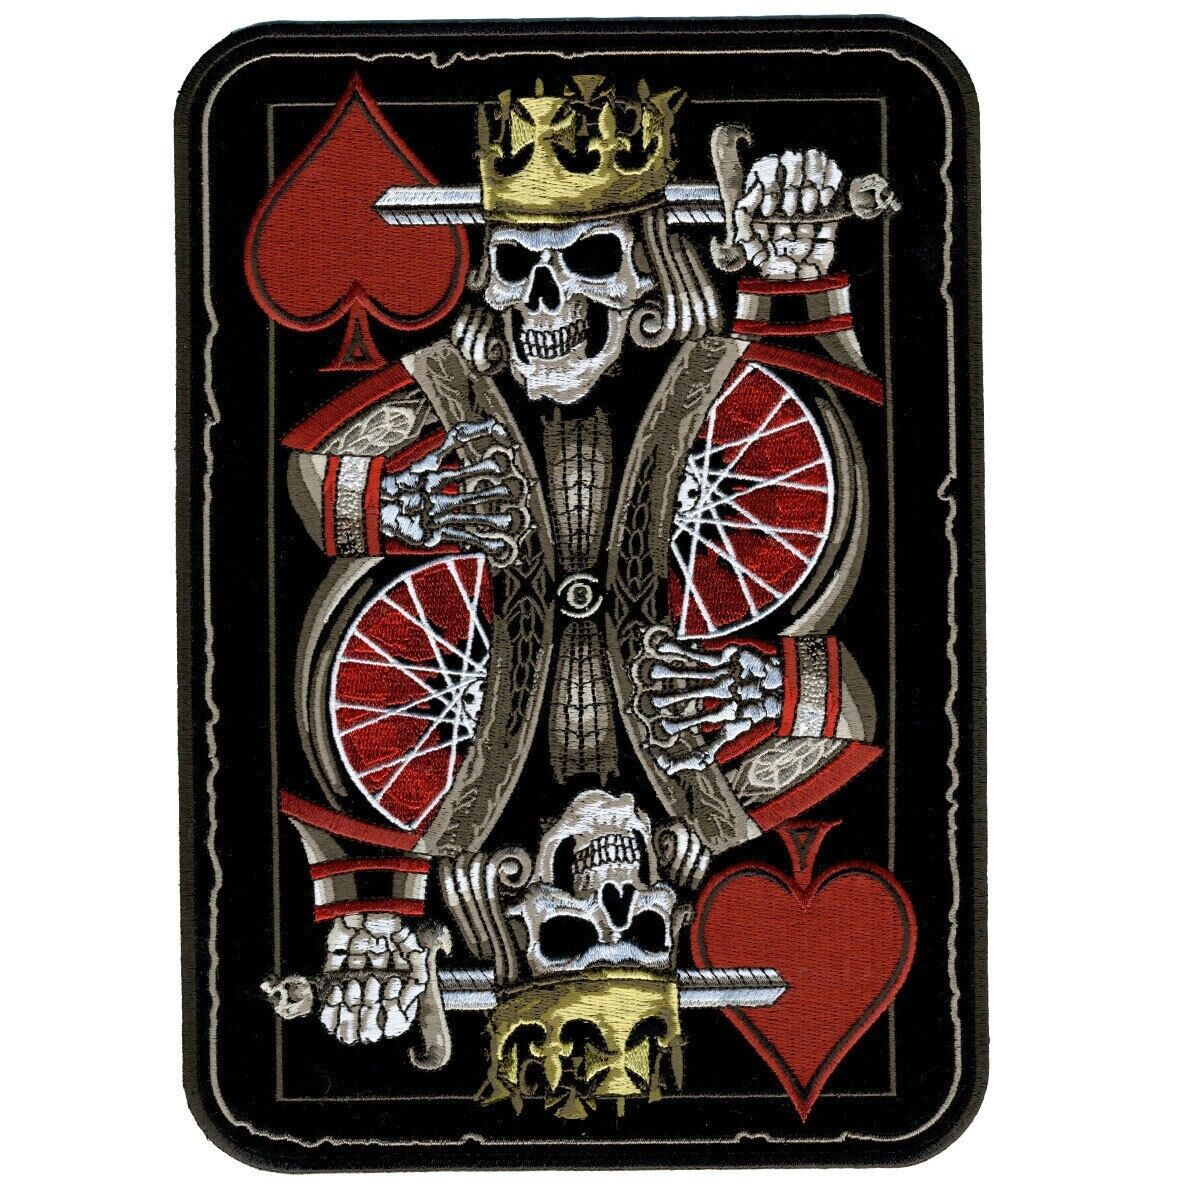 Suicide King Embroidered Jacket Vest Back Patch - 10.0 X 7.0 Inch Iron on Sew on